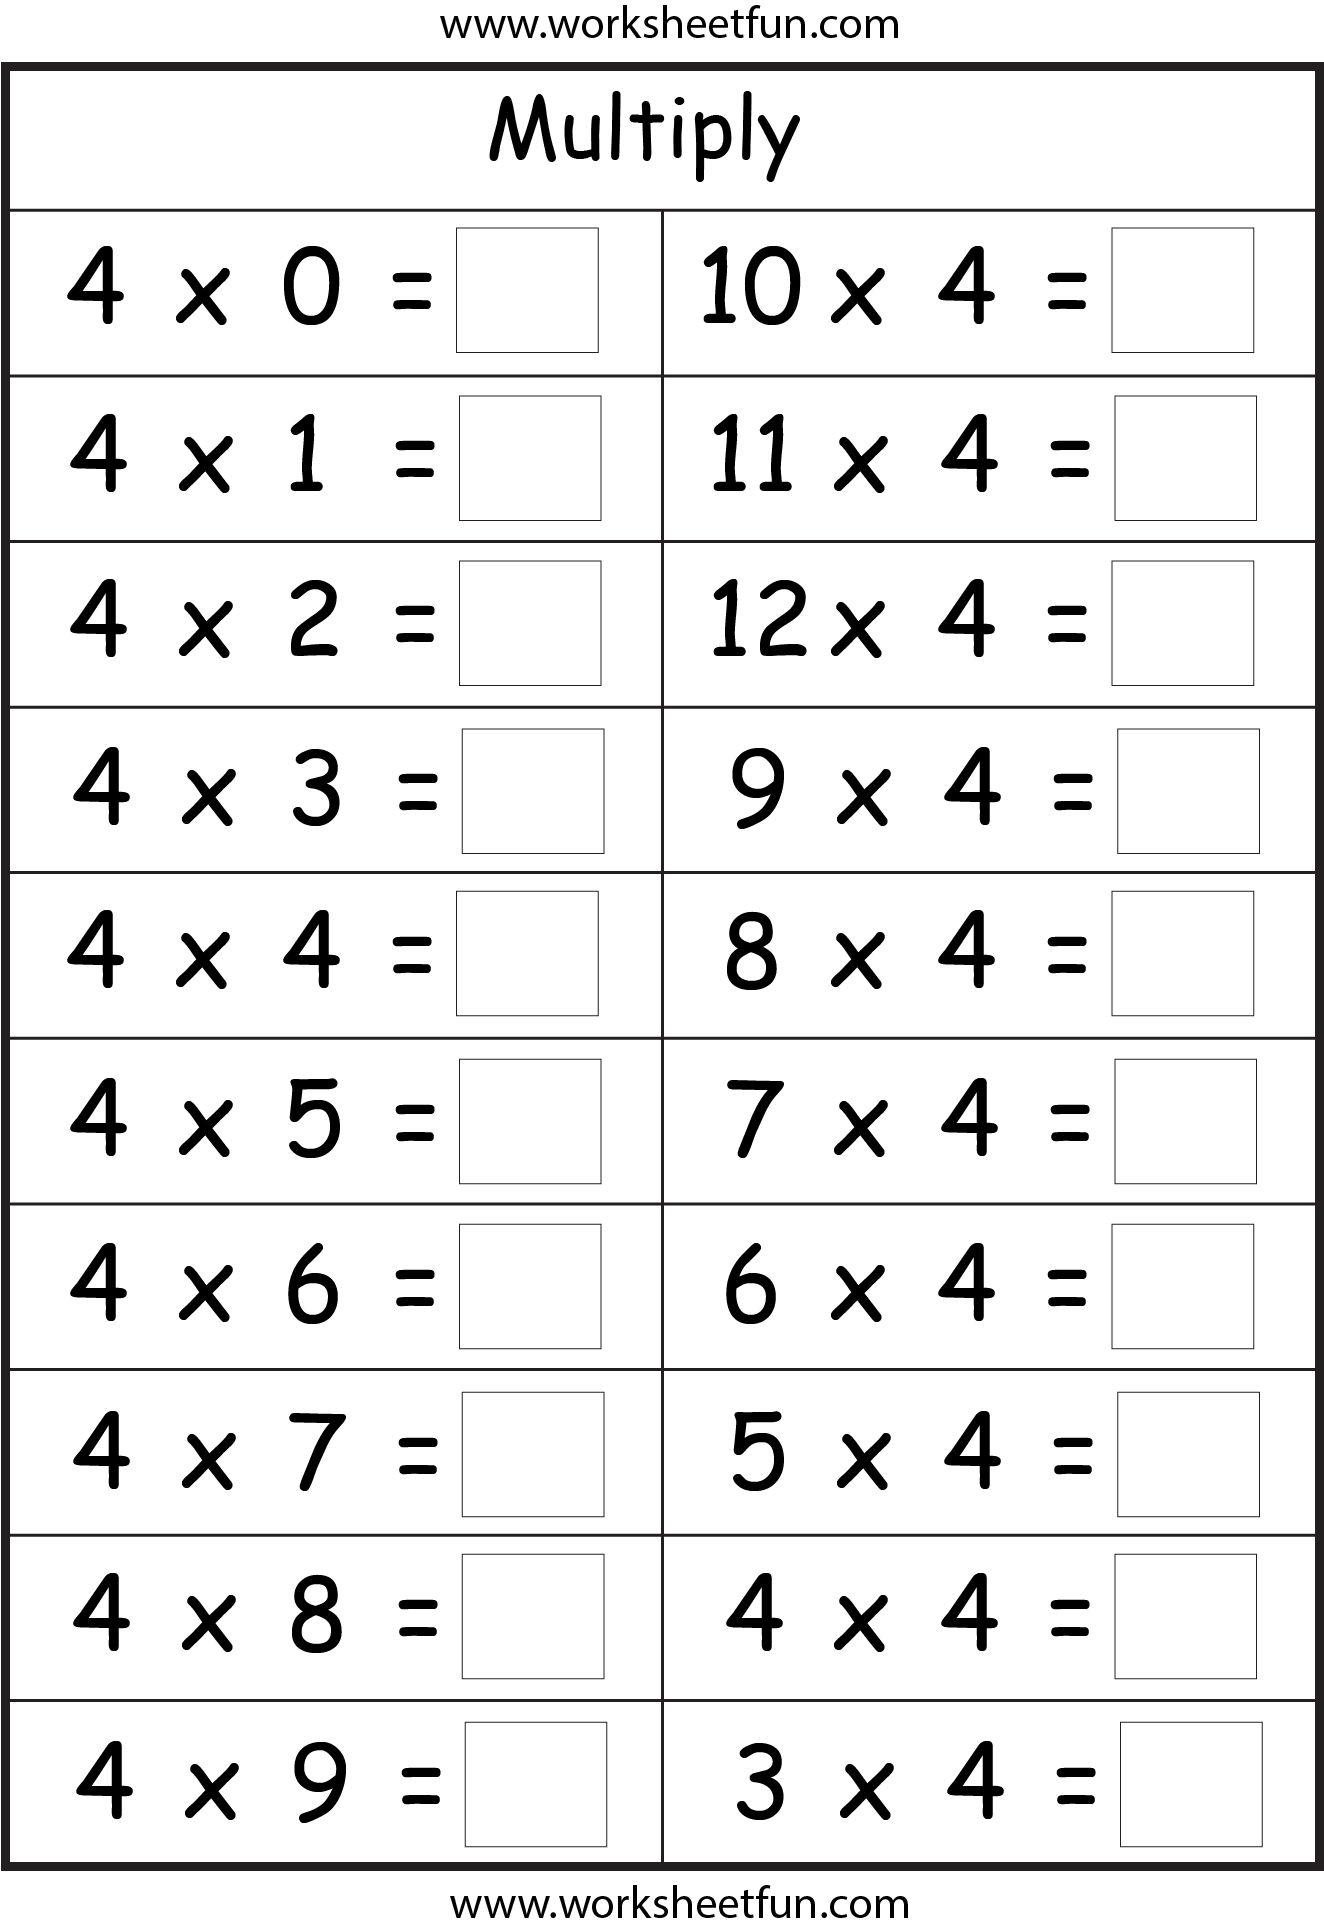 11 And 12 Multiplication Facts Worksheets